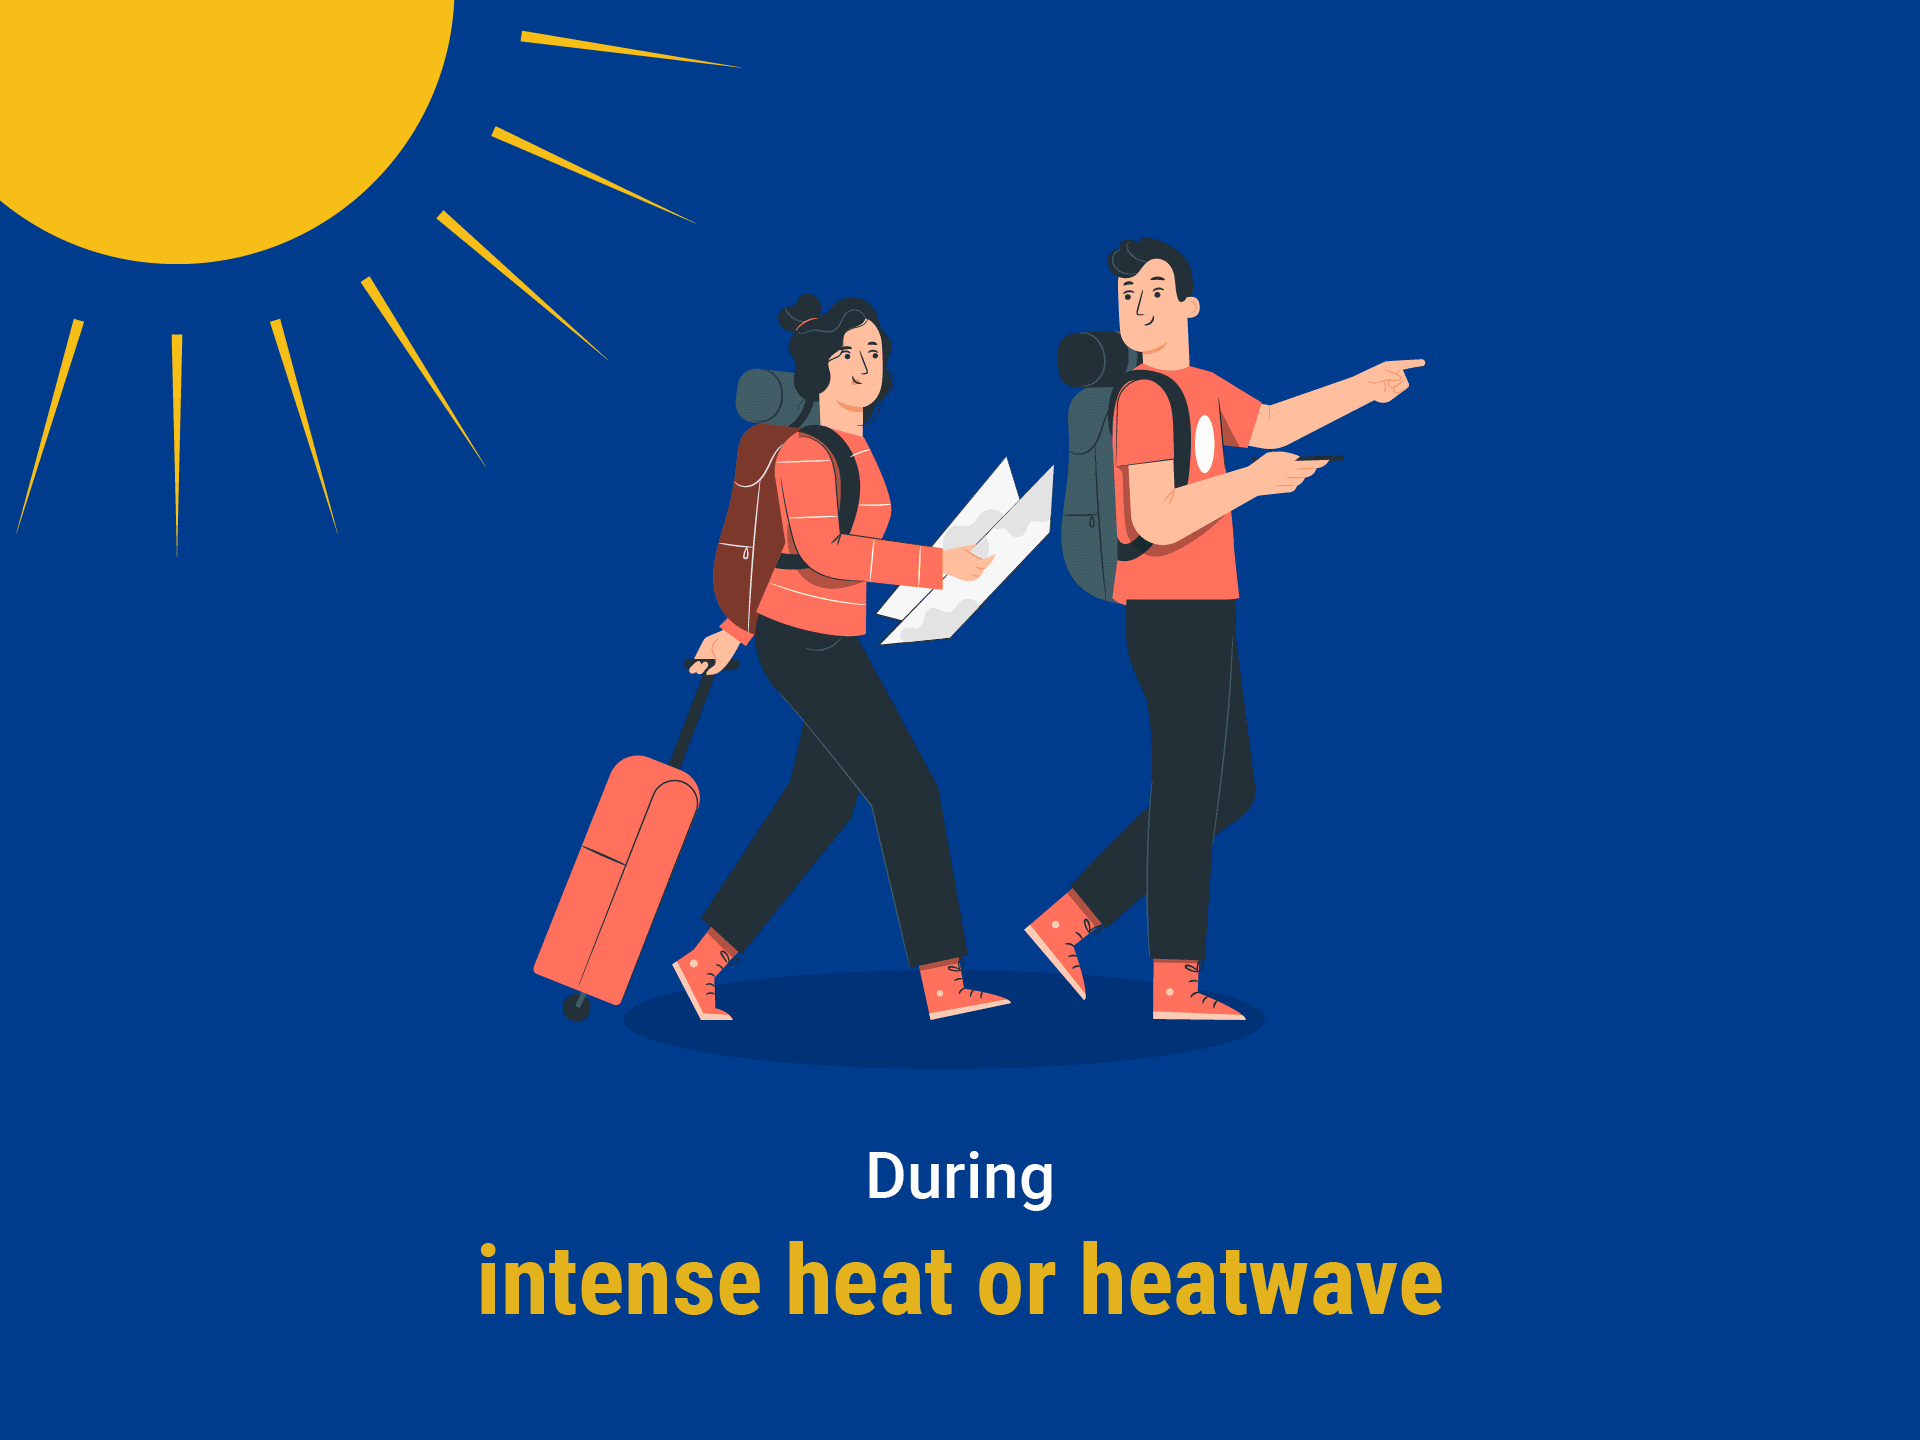 SOS TIPS ON HOT WEATHER AND HEATWAVE